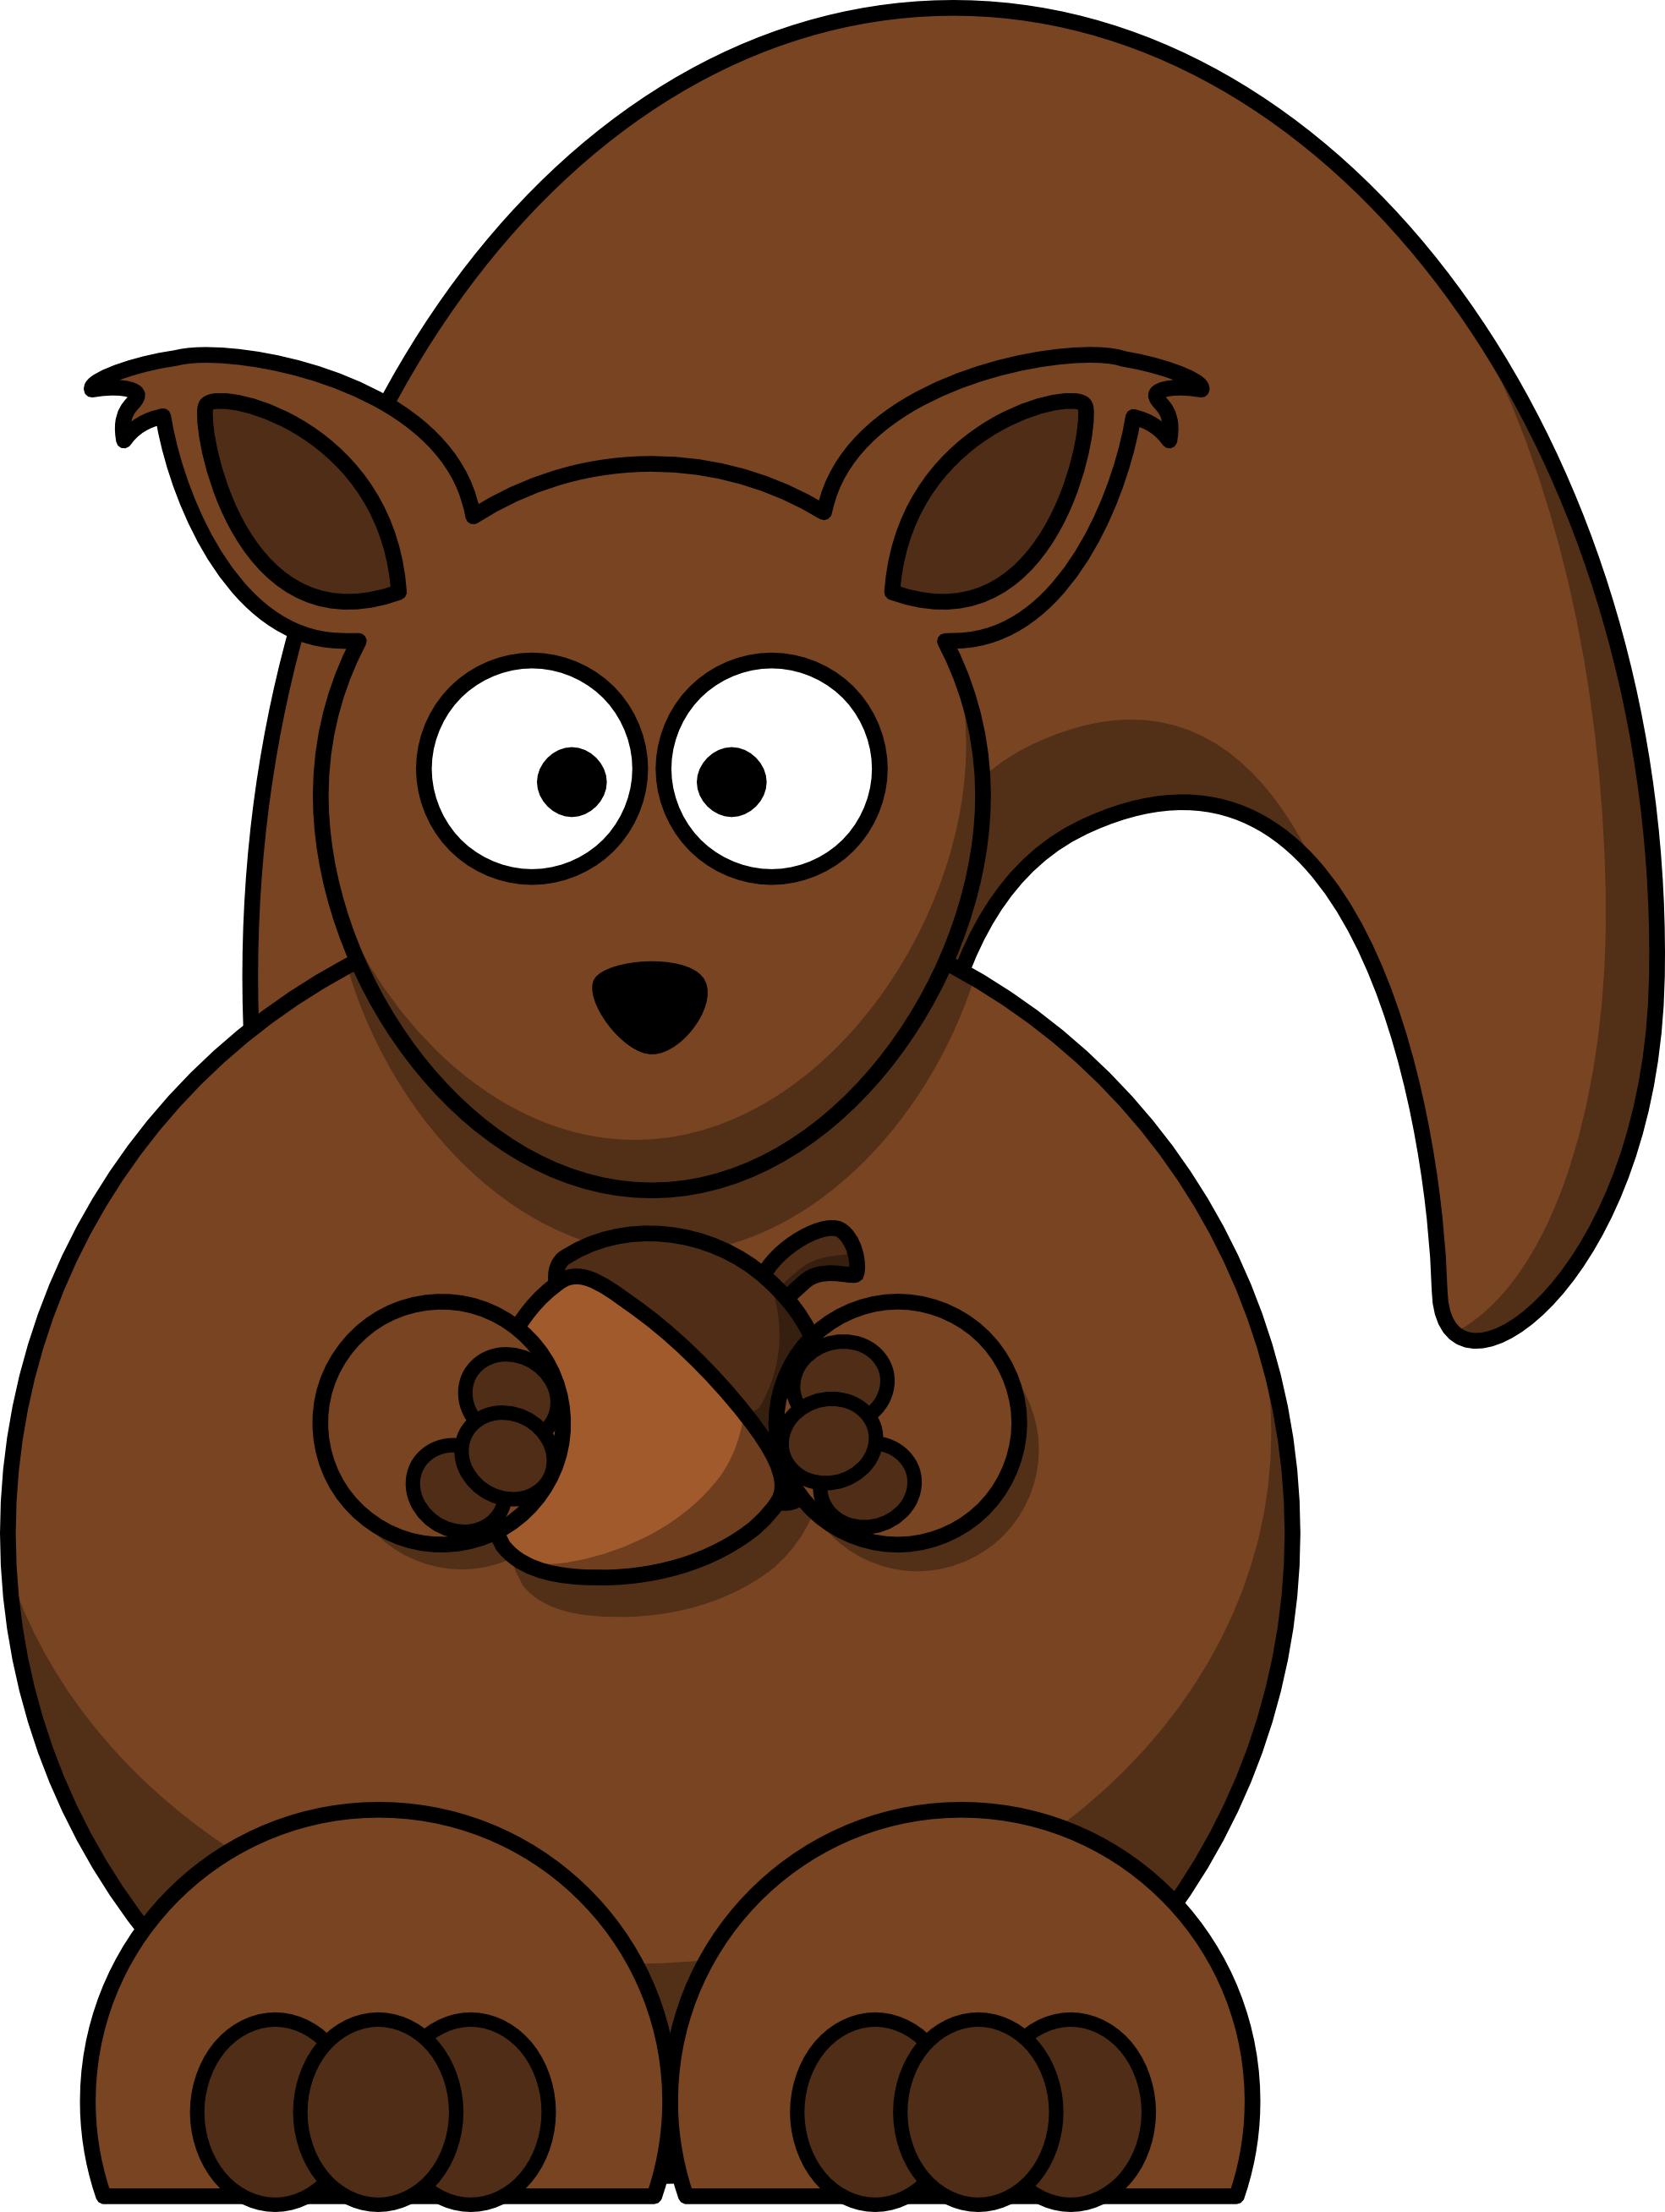 lemmling cartoon squirrel | Clipart Panda - Free Clipart Images